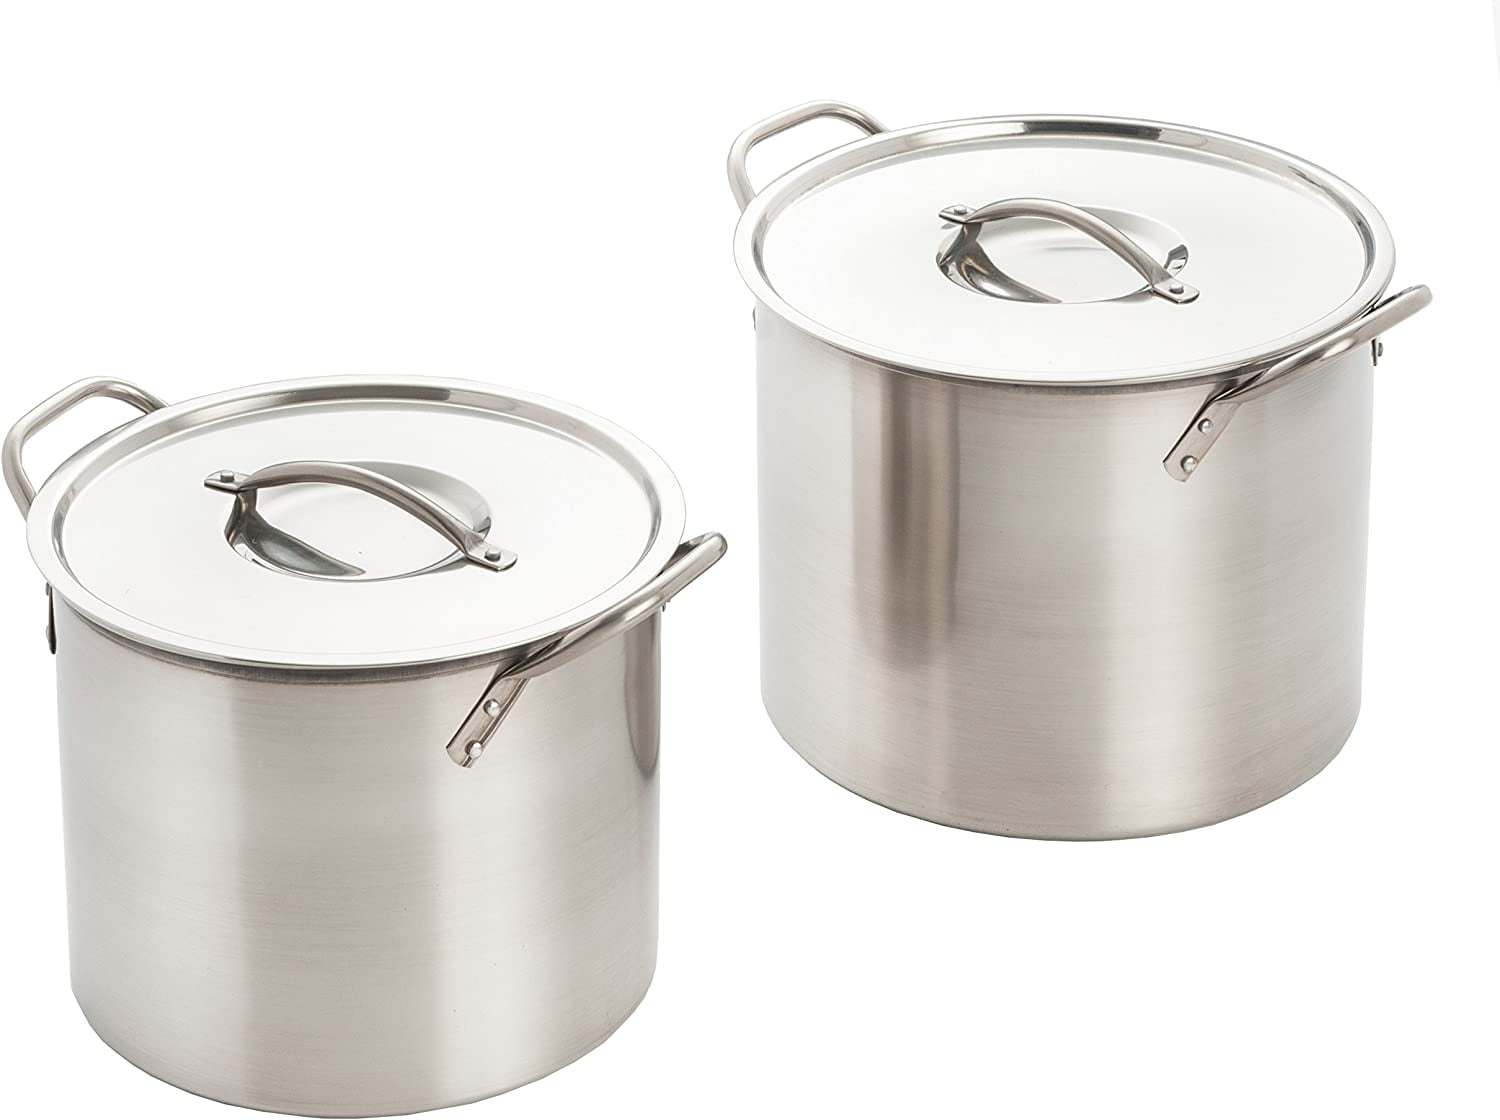 ExcelSteel 4-Piece 12 Qt. Professional 18/10 Stainless Steel Multi